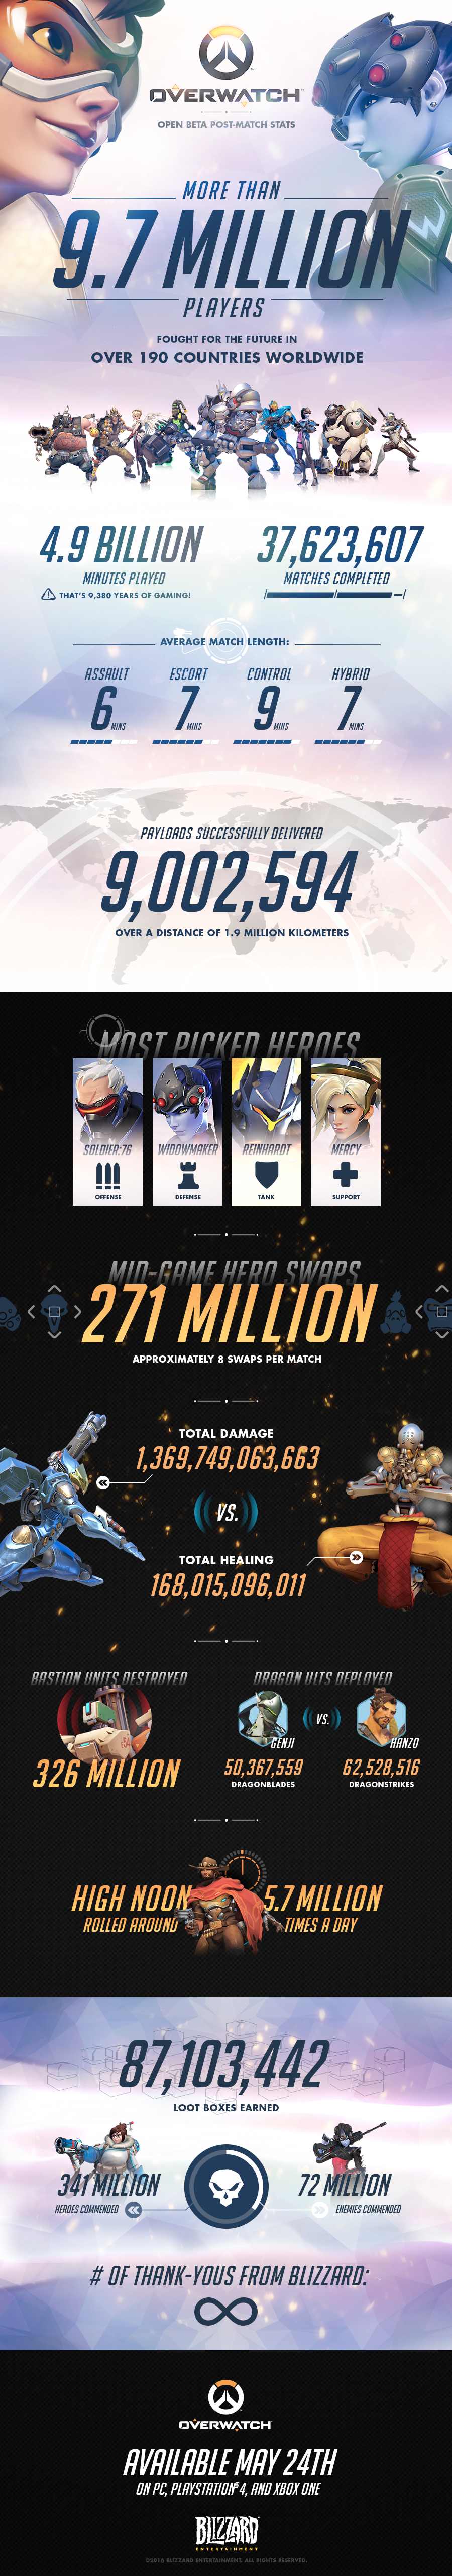 Overwatch be?ta infographie